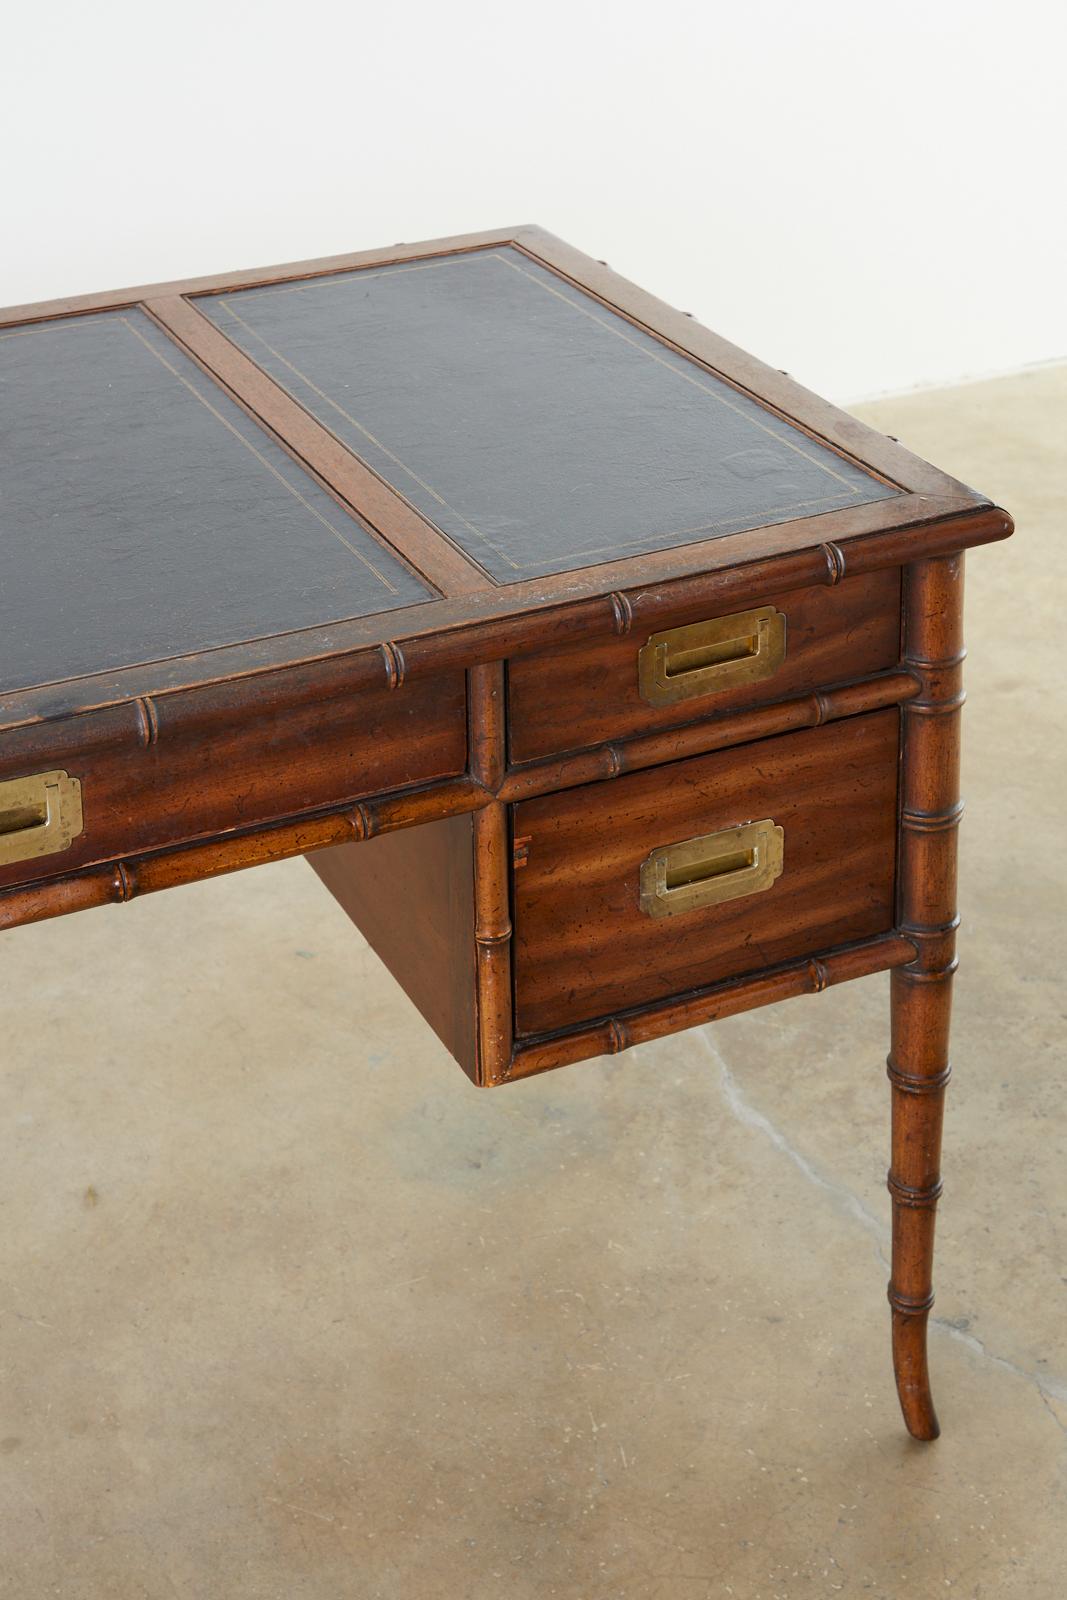 American Midcentury Faux Bamboo Leather Top Writing Desk by Drexel